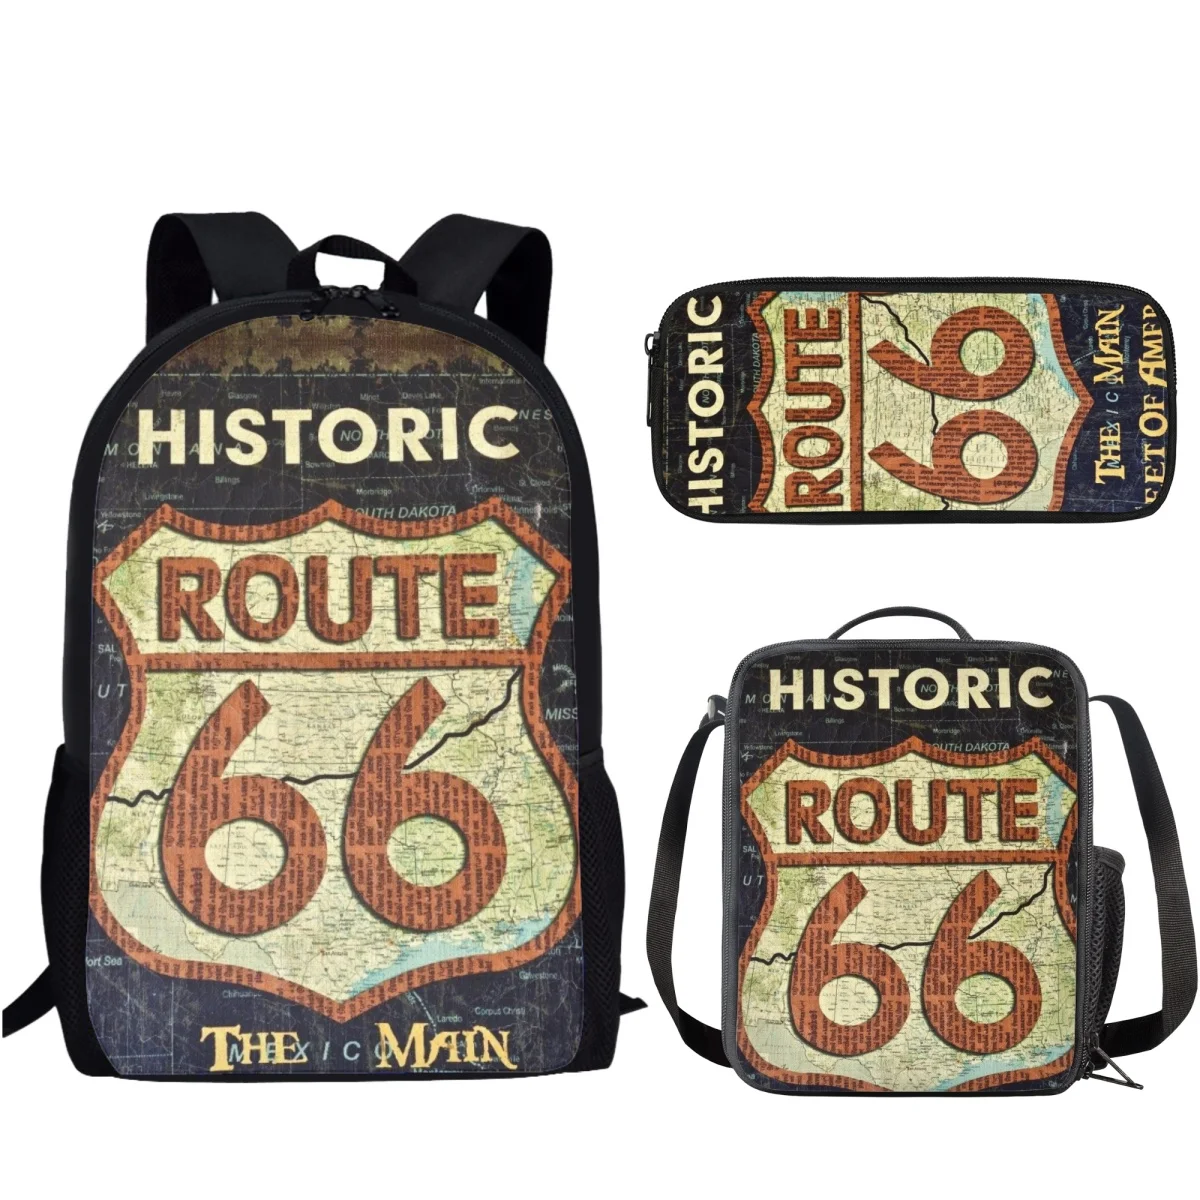 

Dropshipping Custom America Route 66 Letters Children School Bag Set of 3 Casual Bookbag for Kids Teenagers Schoolbags Satchel